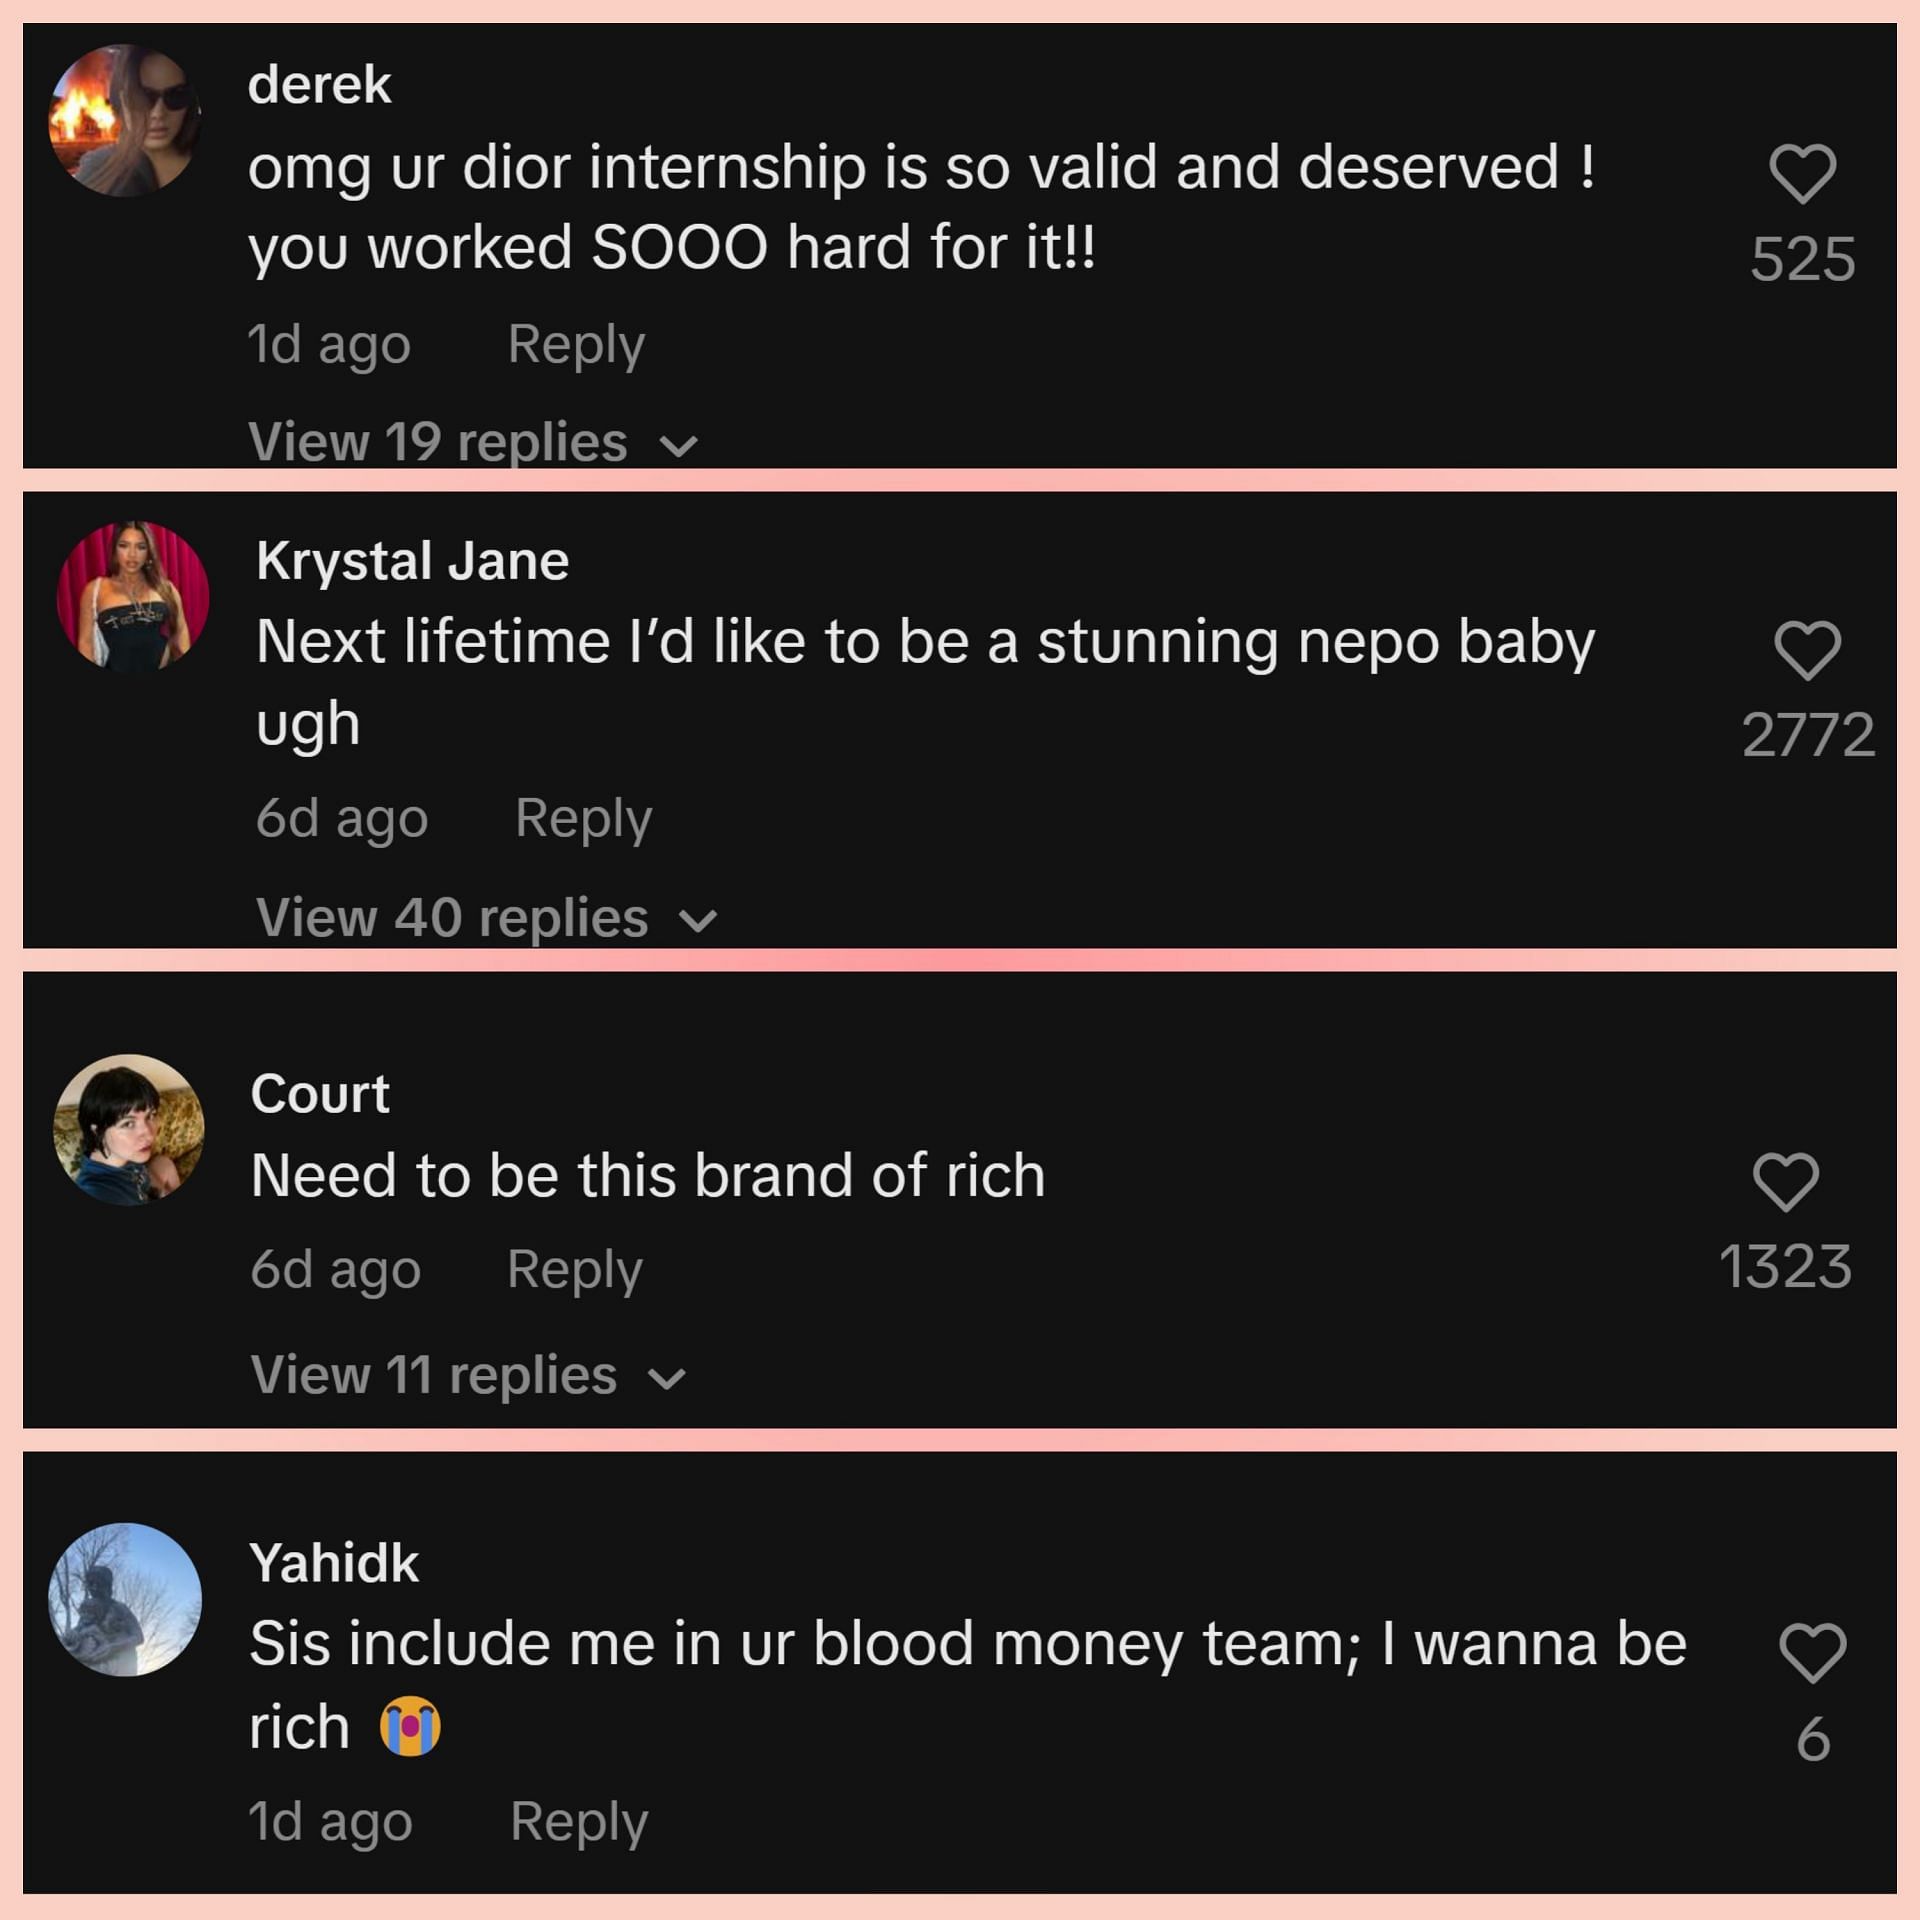 Some of the comments under her latest (July 6) TikTok